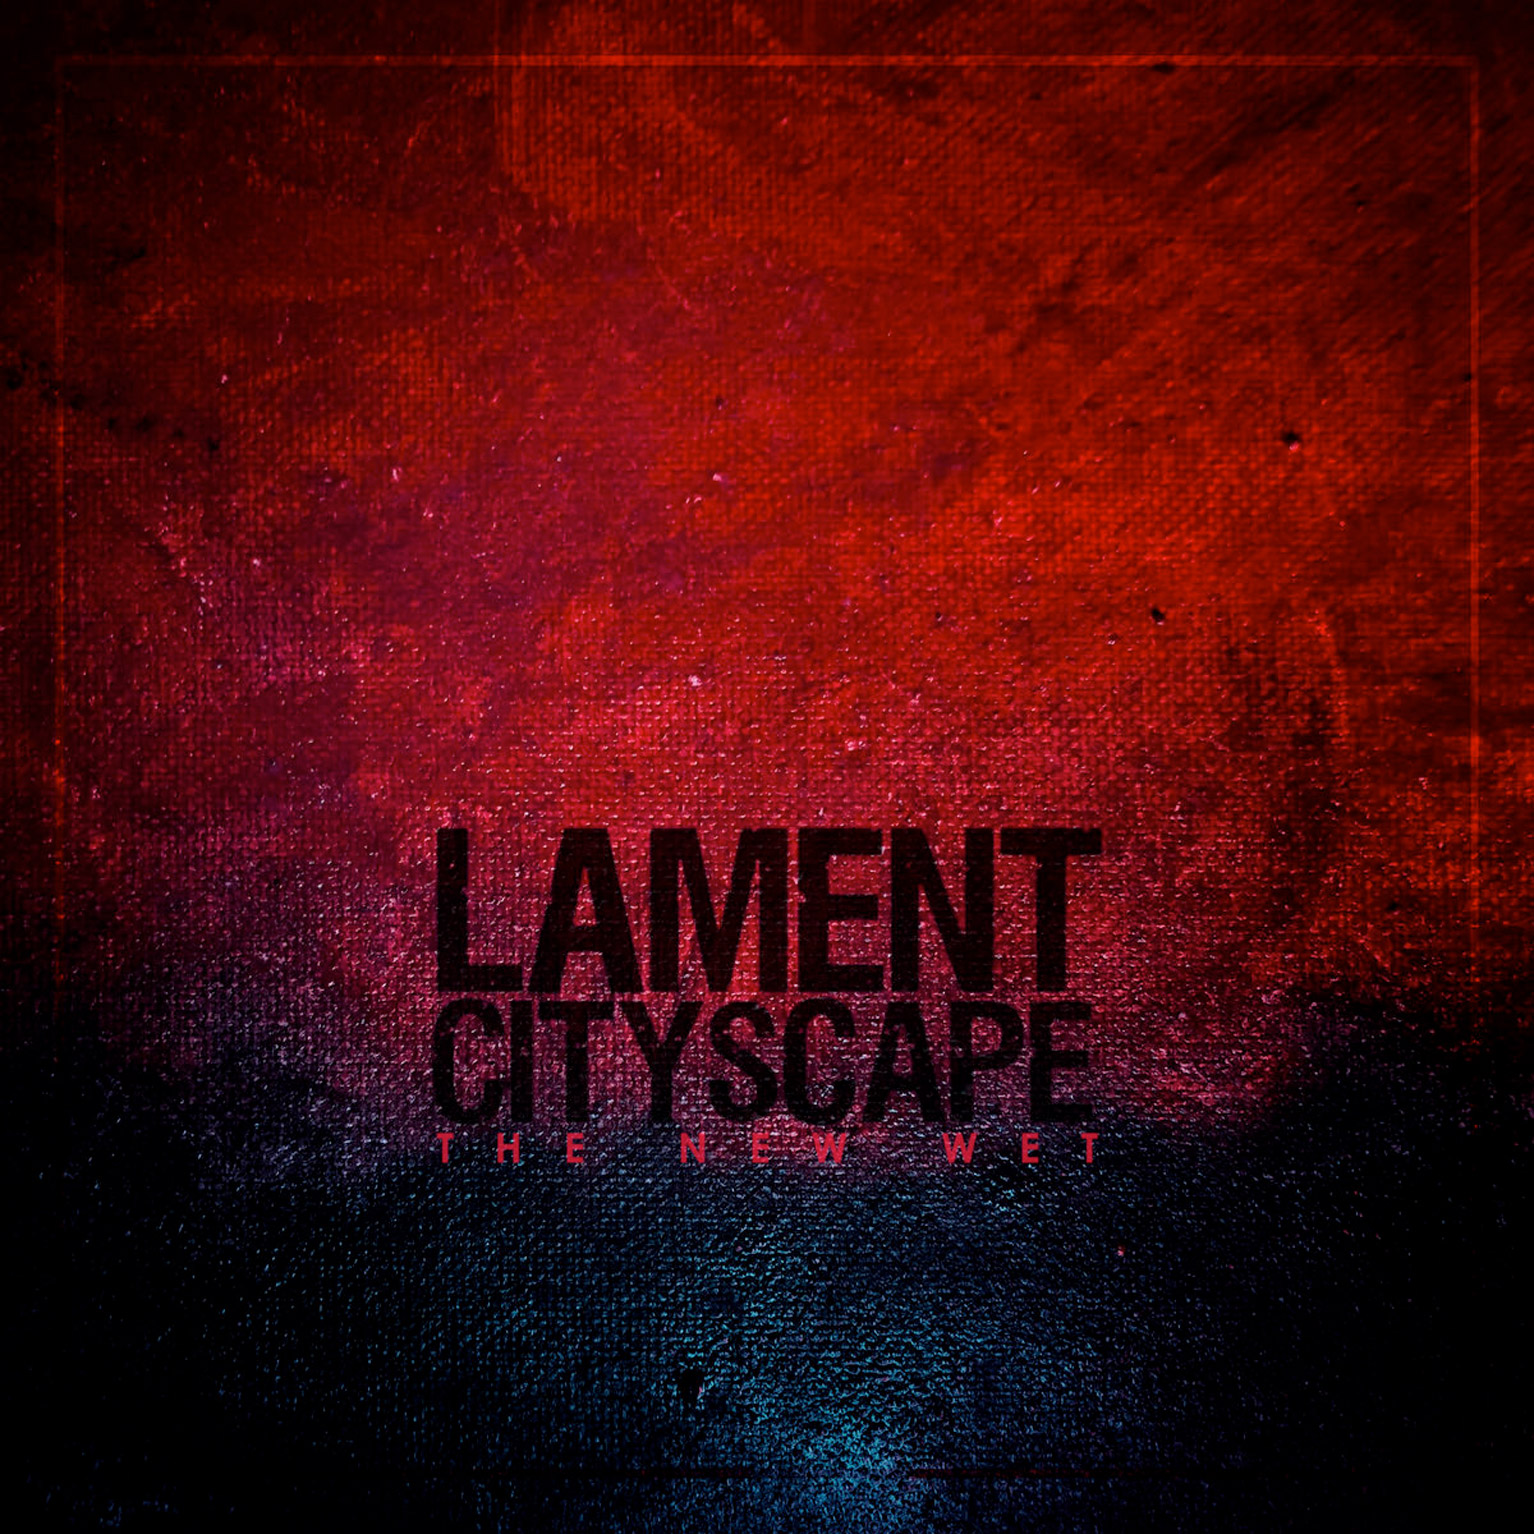 Interview: Lament Cityscape Dispenses First-Rate Industrial Excellence With 'The New Wet' - Aversionline